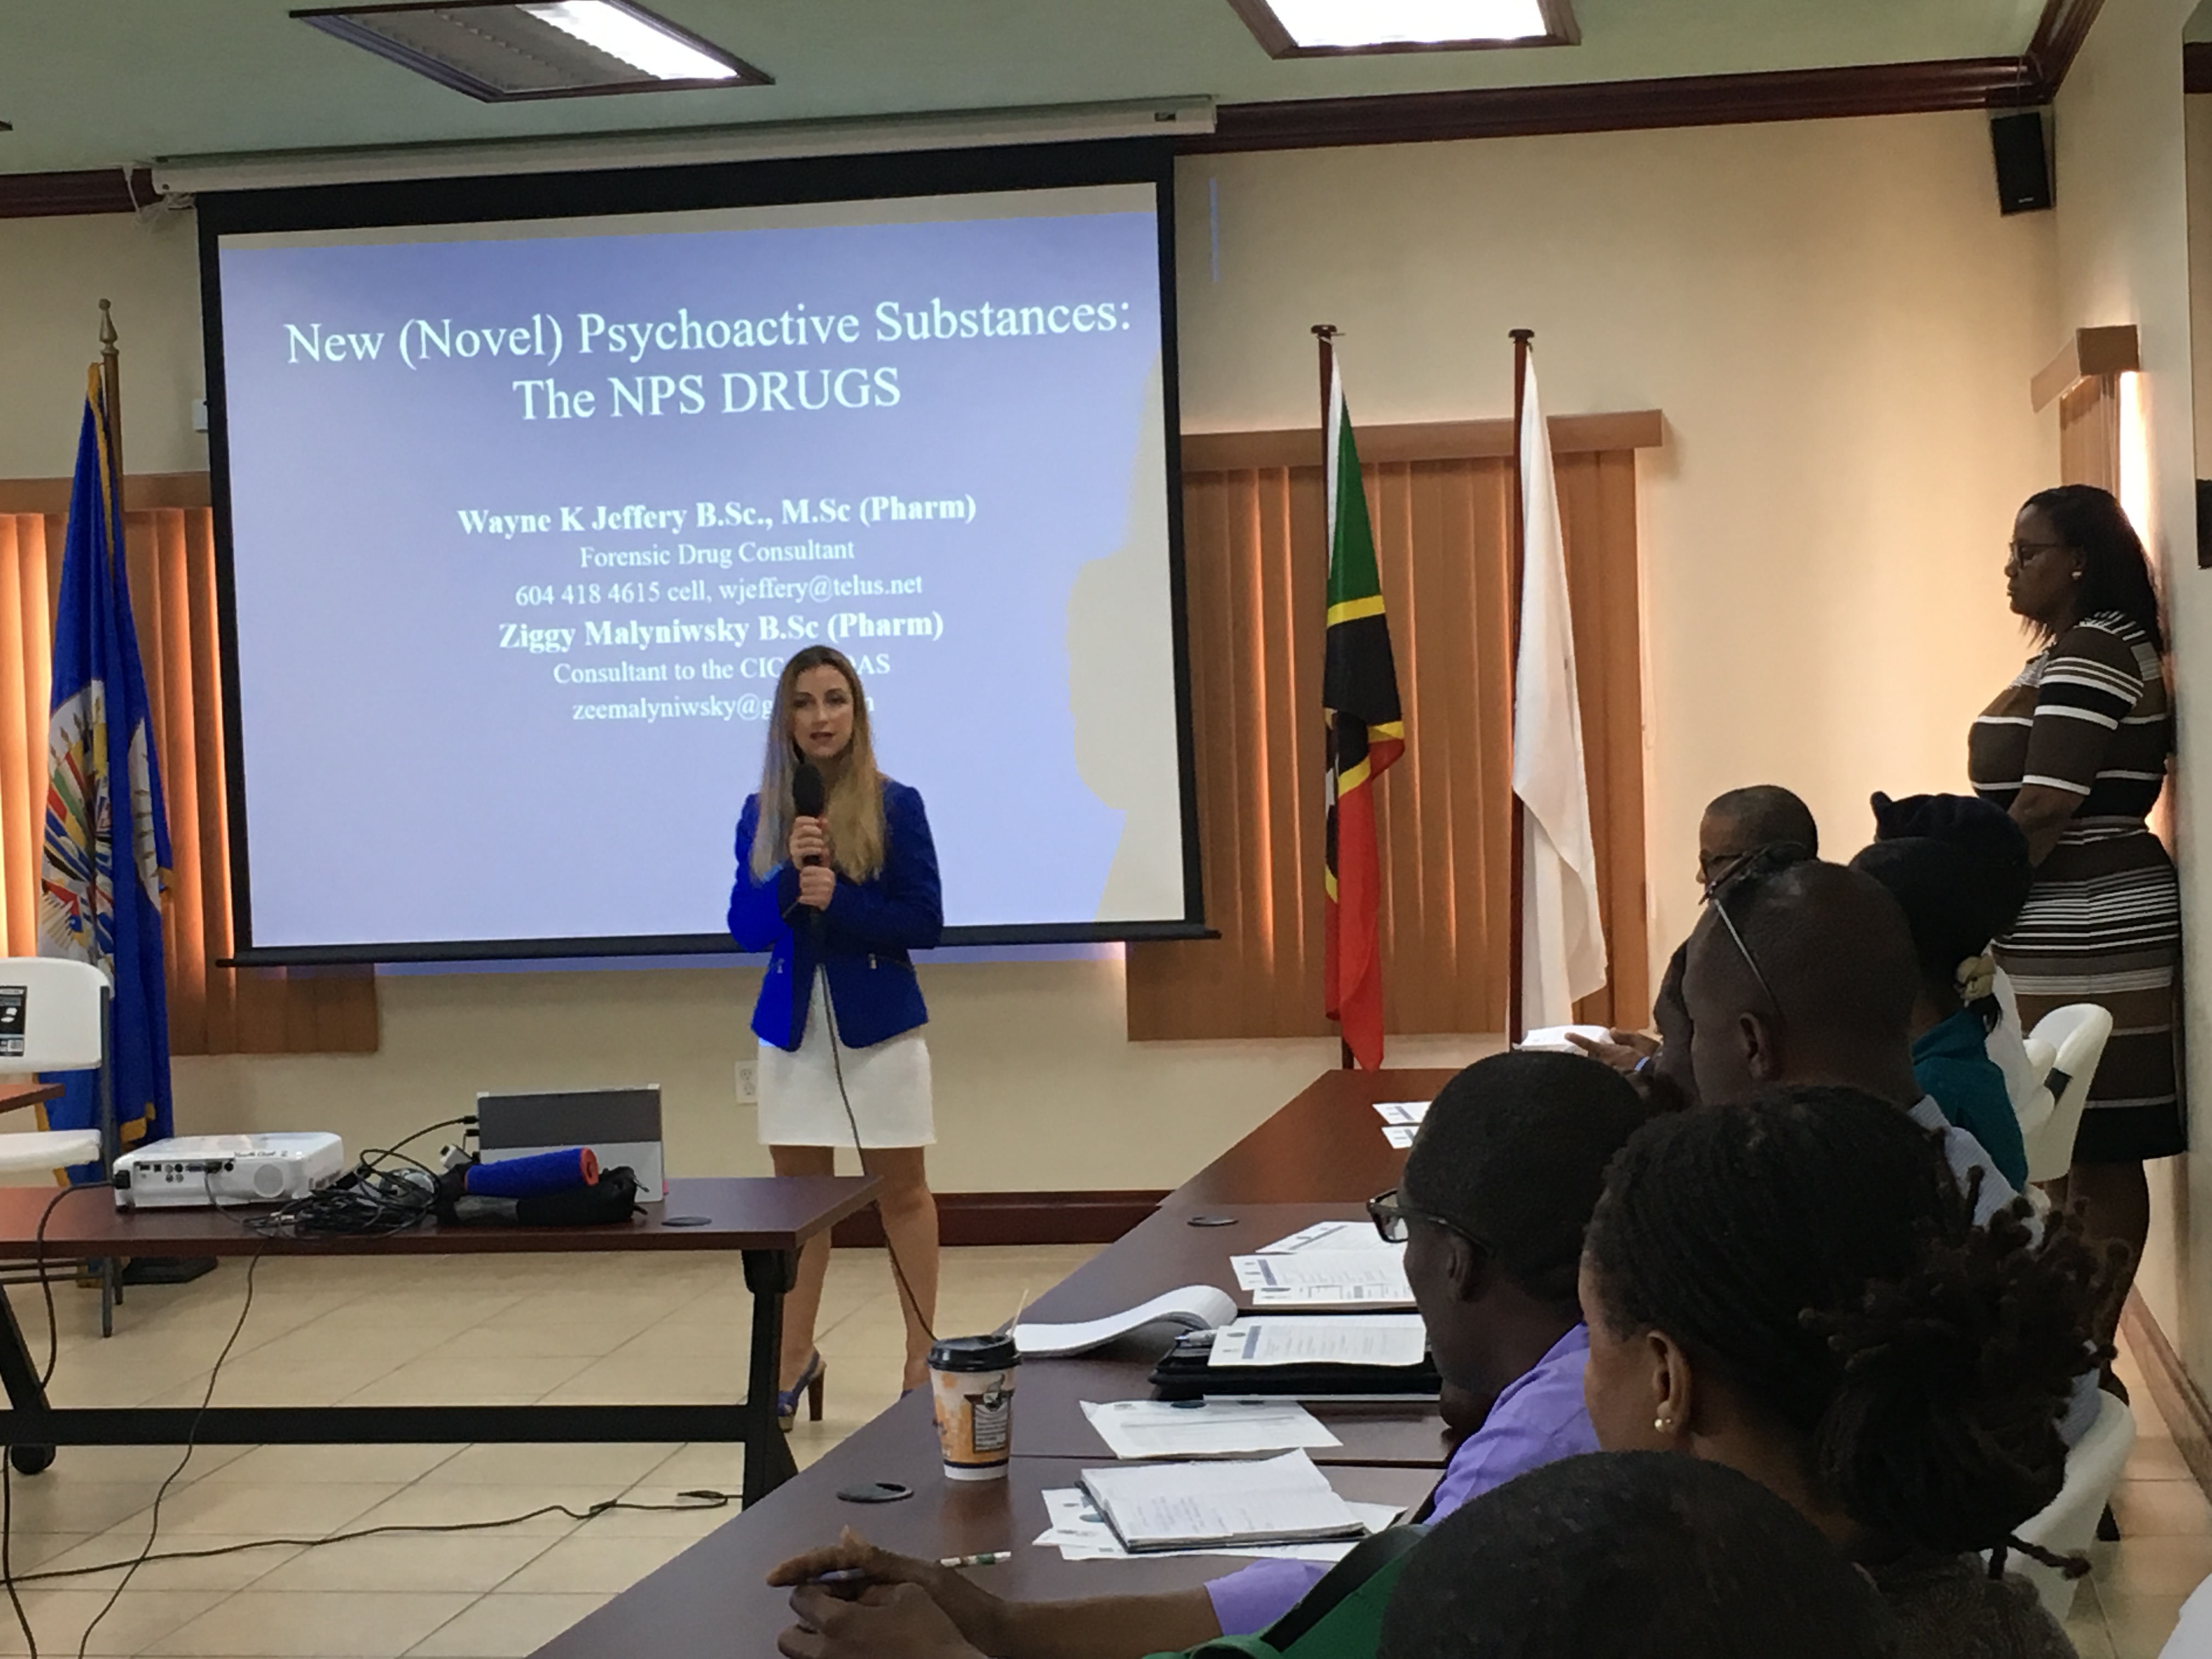 OAS/CICAD Seminar on the Control of Chemicals Used In The Producation Of Illicit Drugs and Synthetic Drugs held in St Kitts and Nevis - April 3-5, 2018